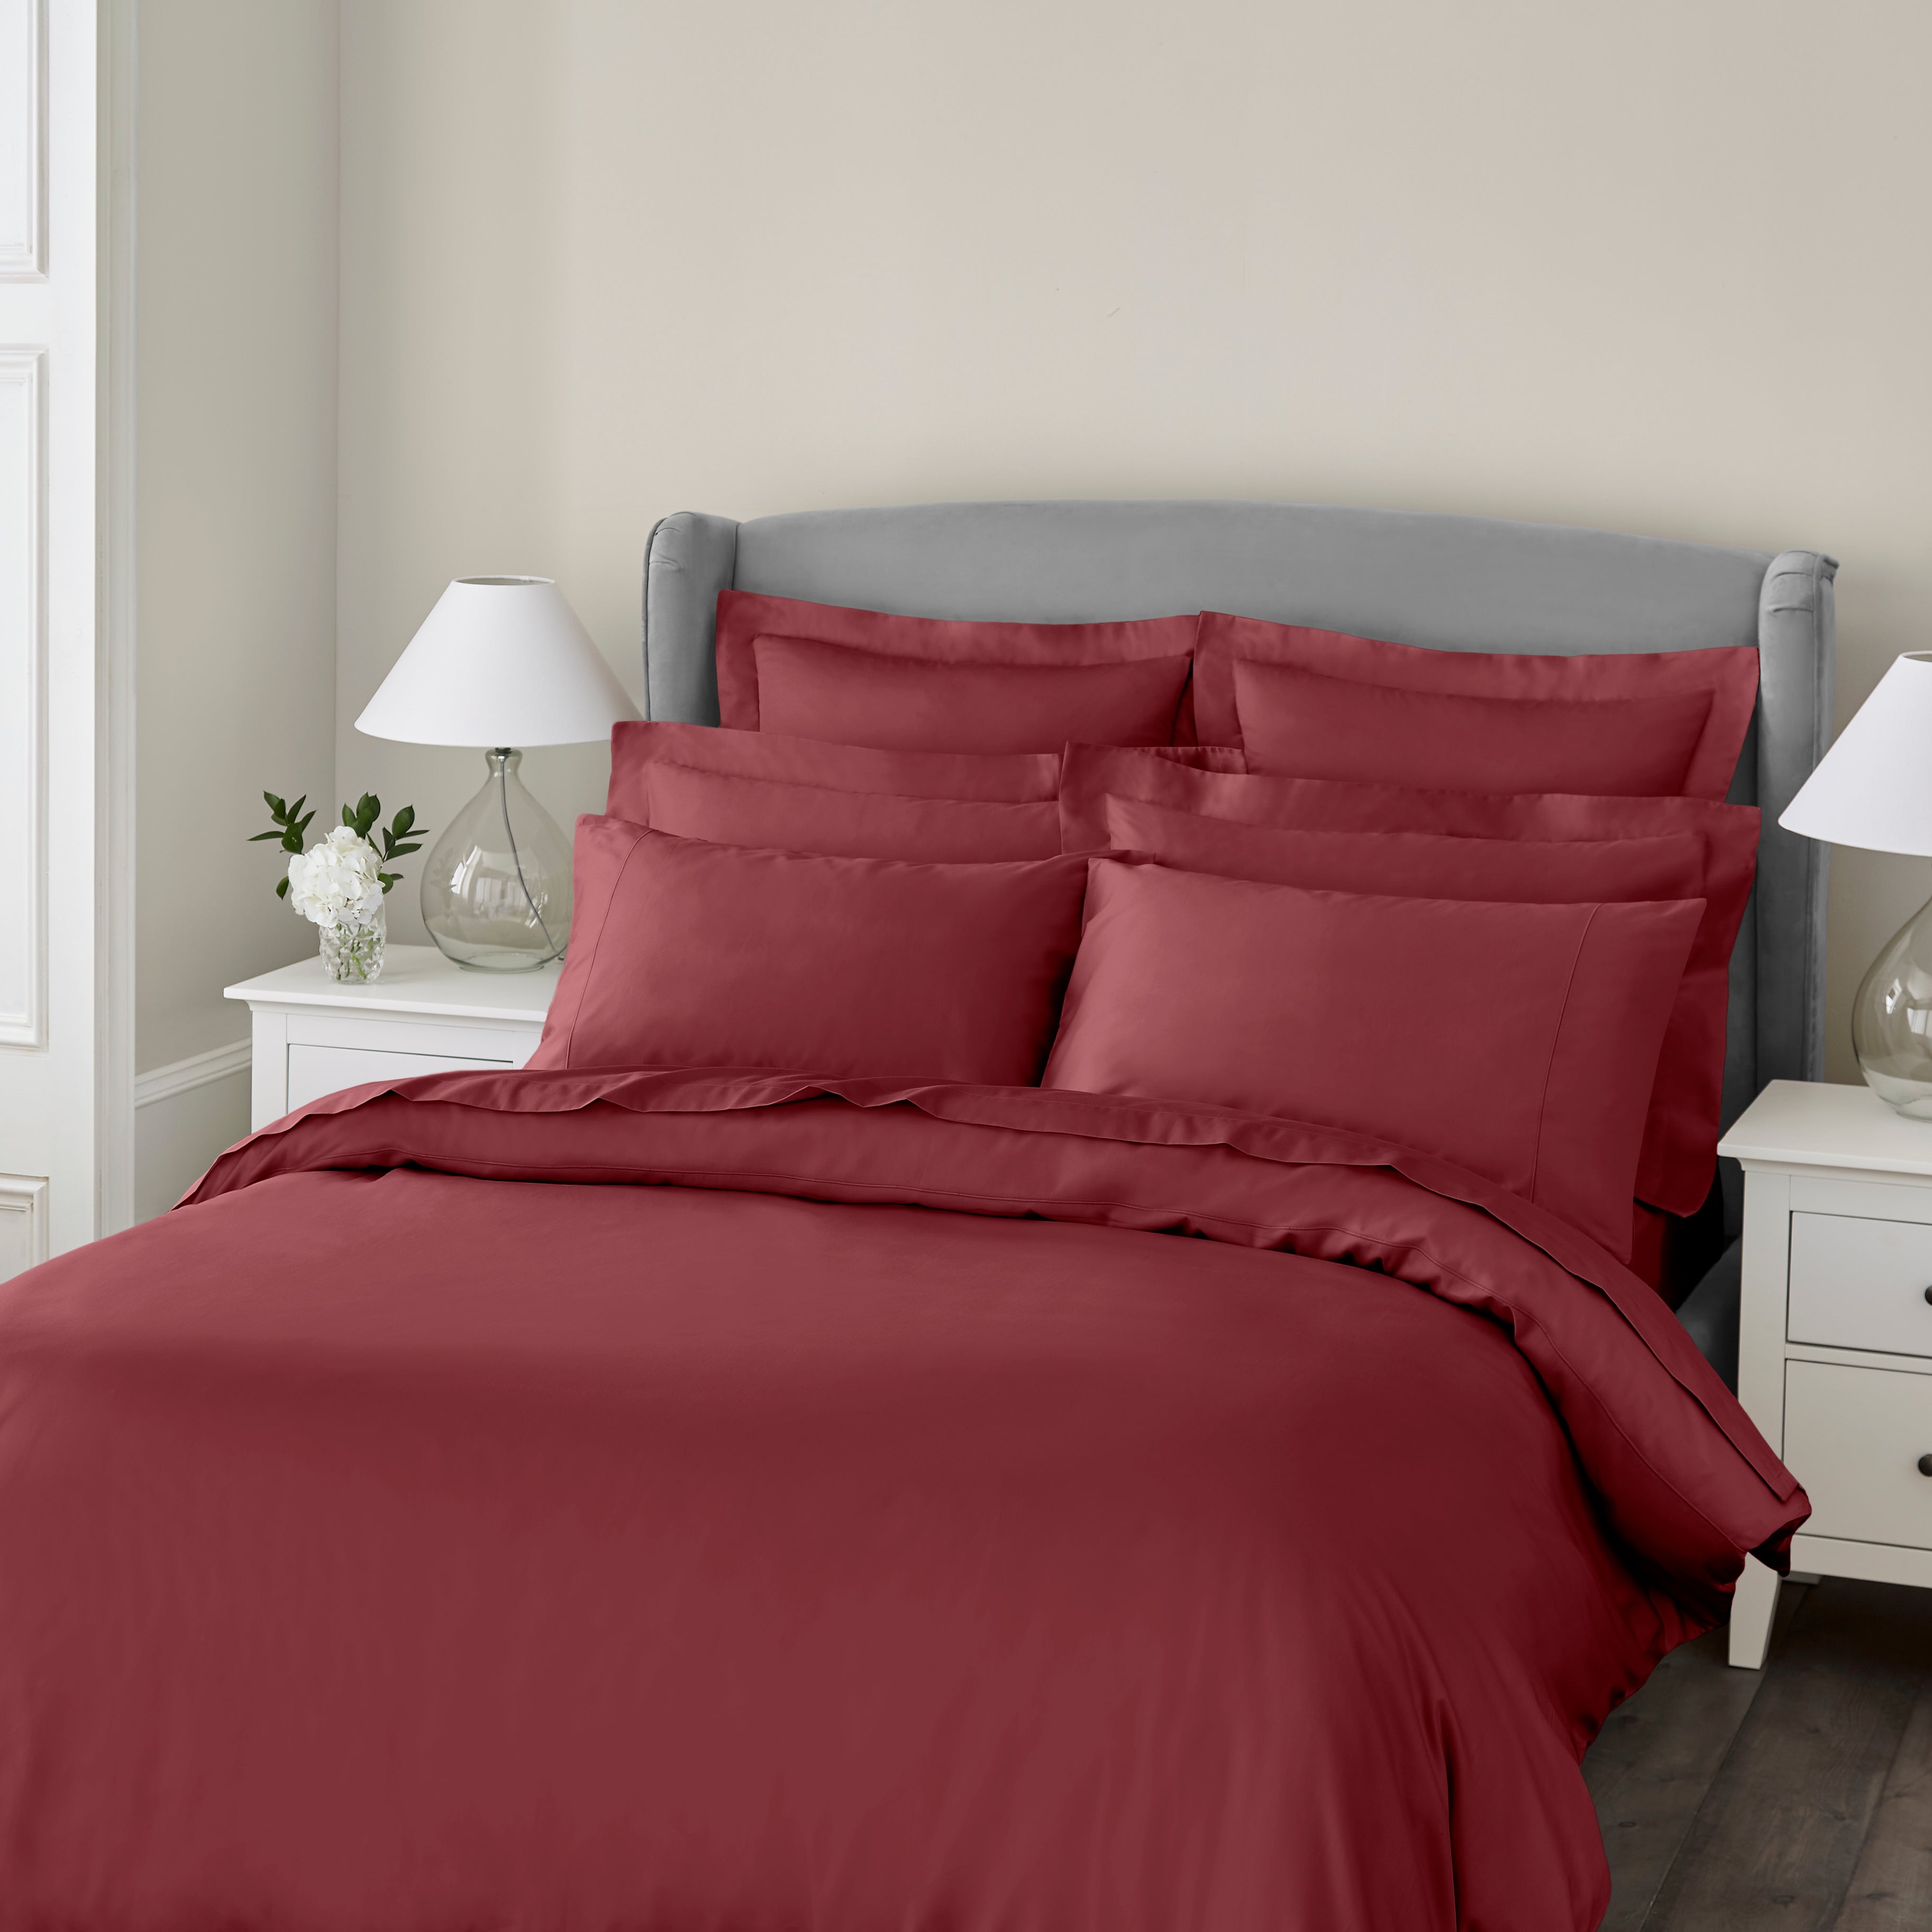 Dorma Egyptian Cotton 400 Thread Count Percale Duvet Cover Red Dark Red